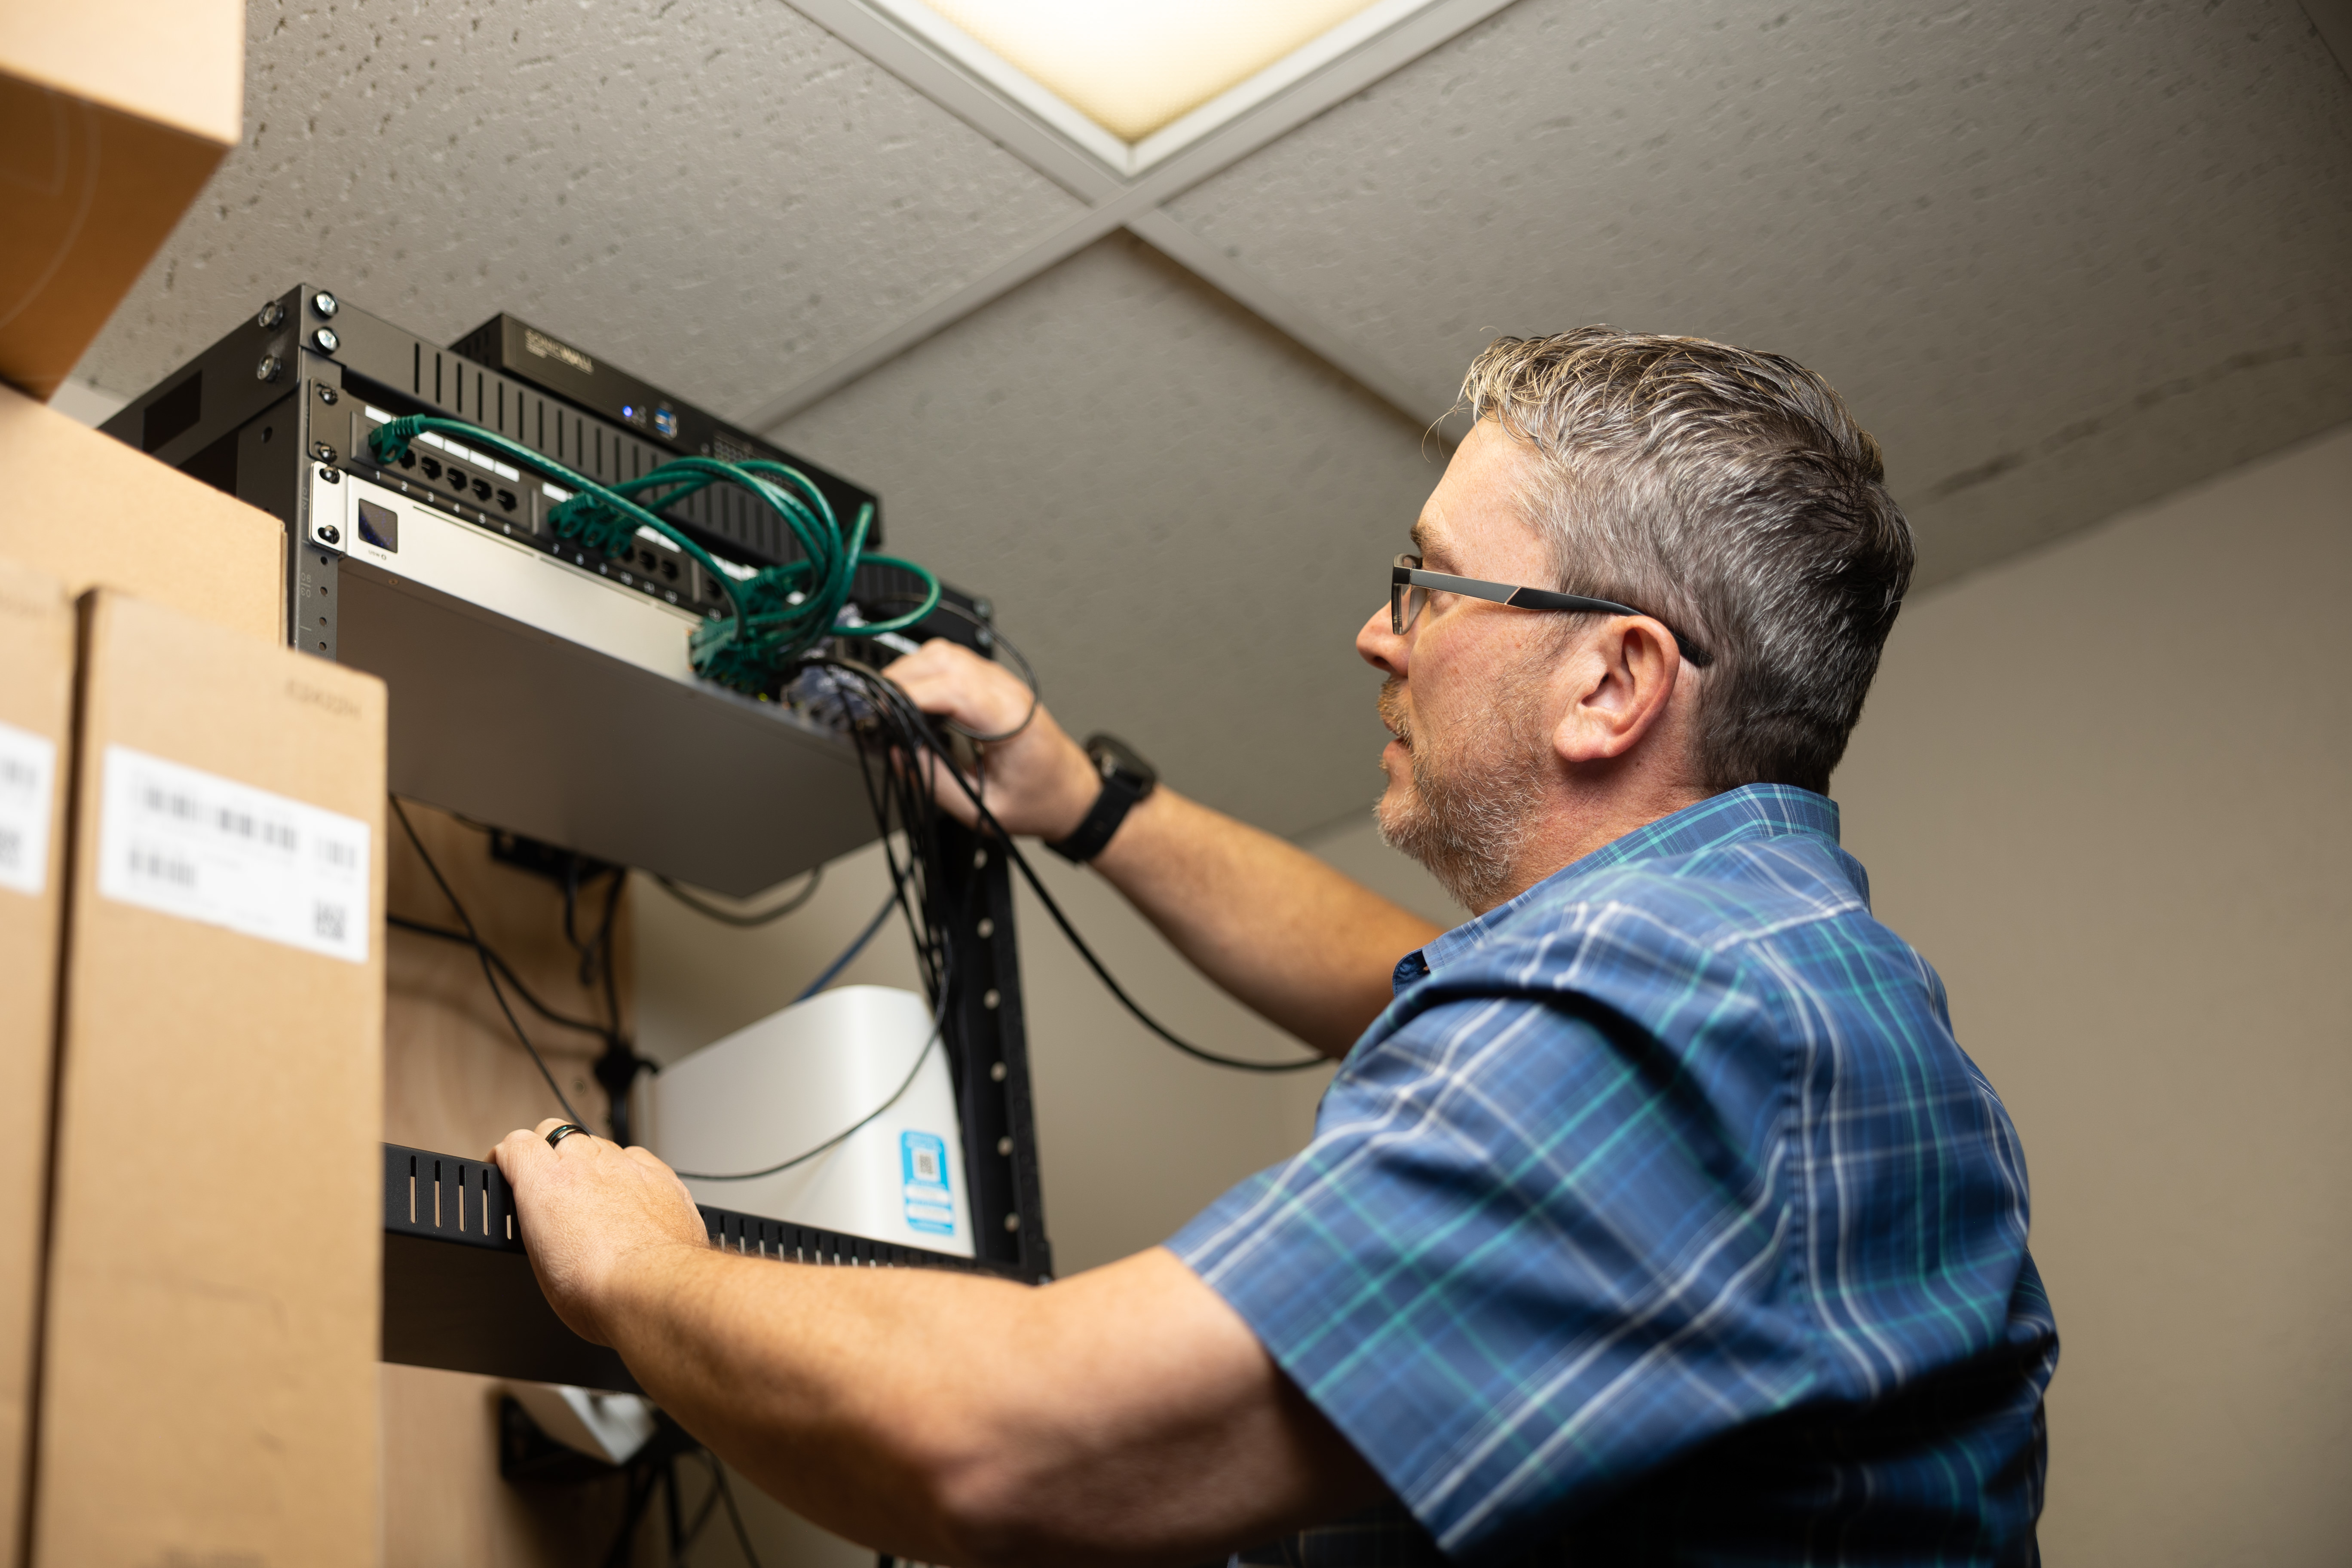 IT professional installing network equipment in office server rack